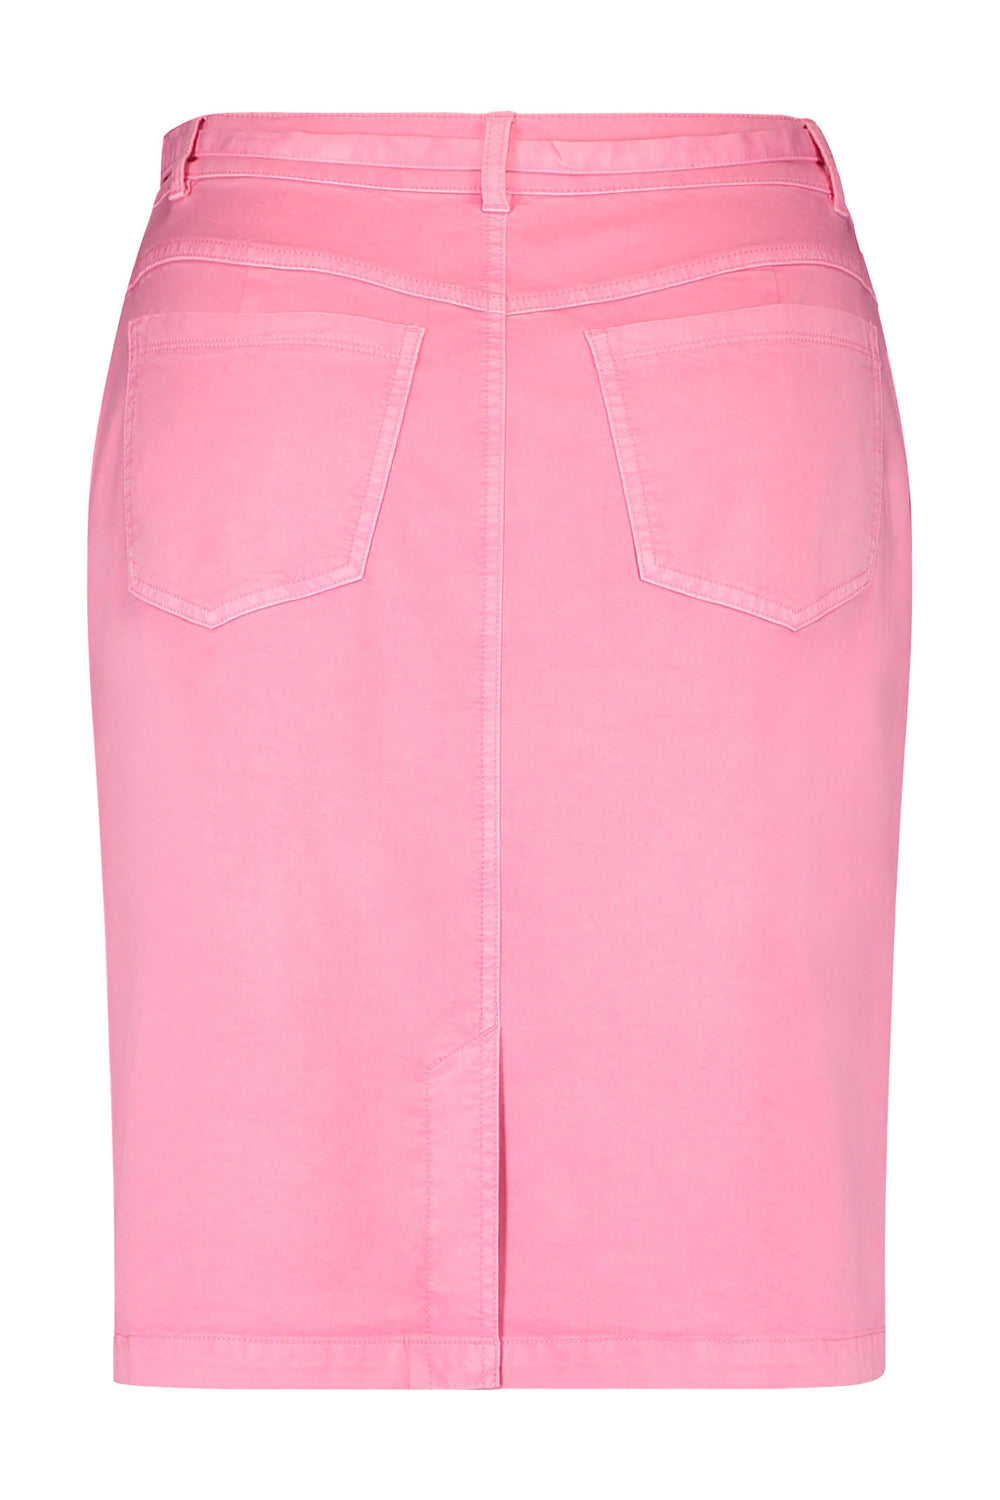 Gerry Weber 211006-66218 Peony Pink Jean Style Skirt - Dotique Chesterfield